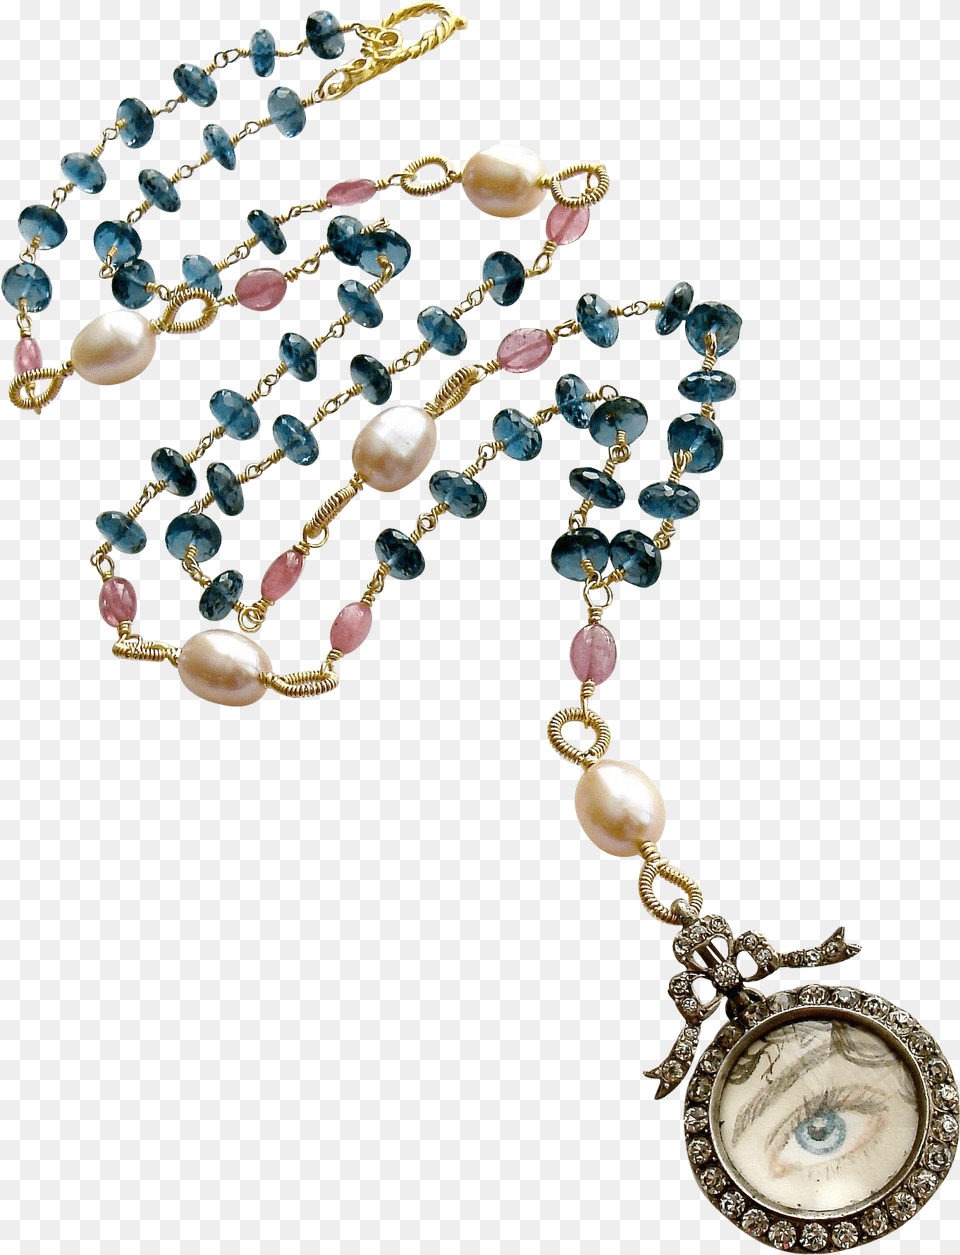 For Sale On Sapphire, Accessories, Jewelry, Necklace, Earring Free Transparent Png